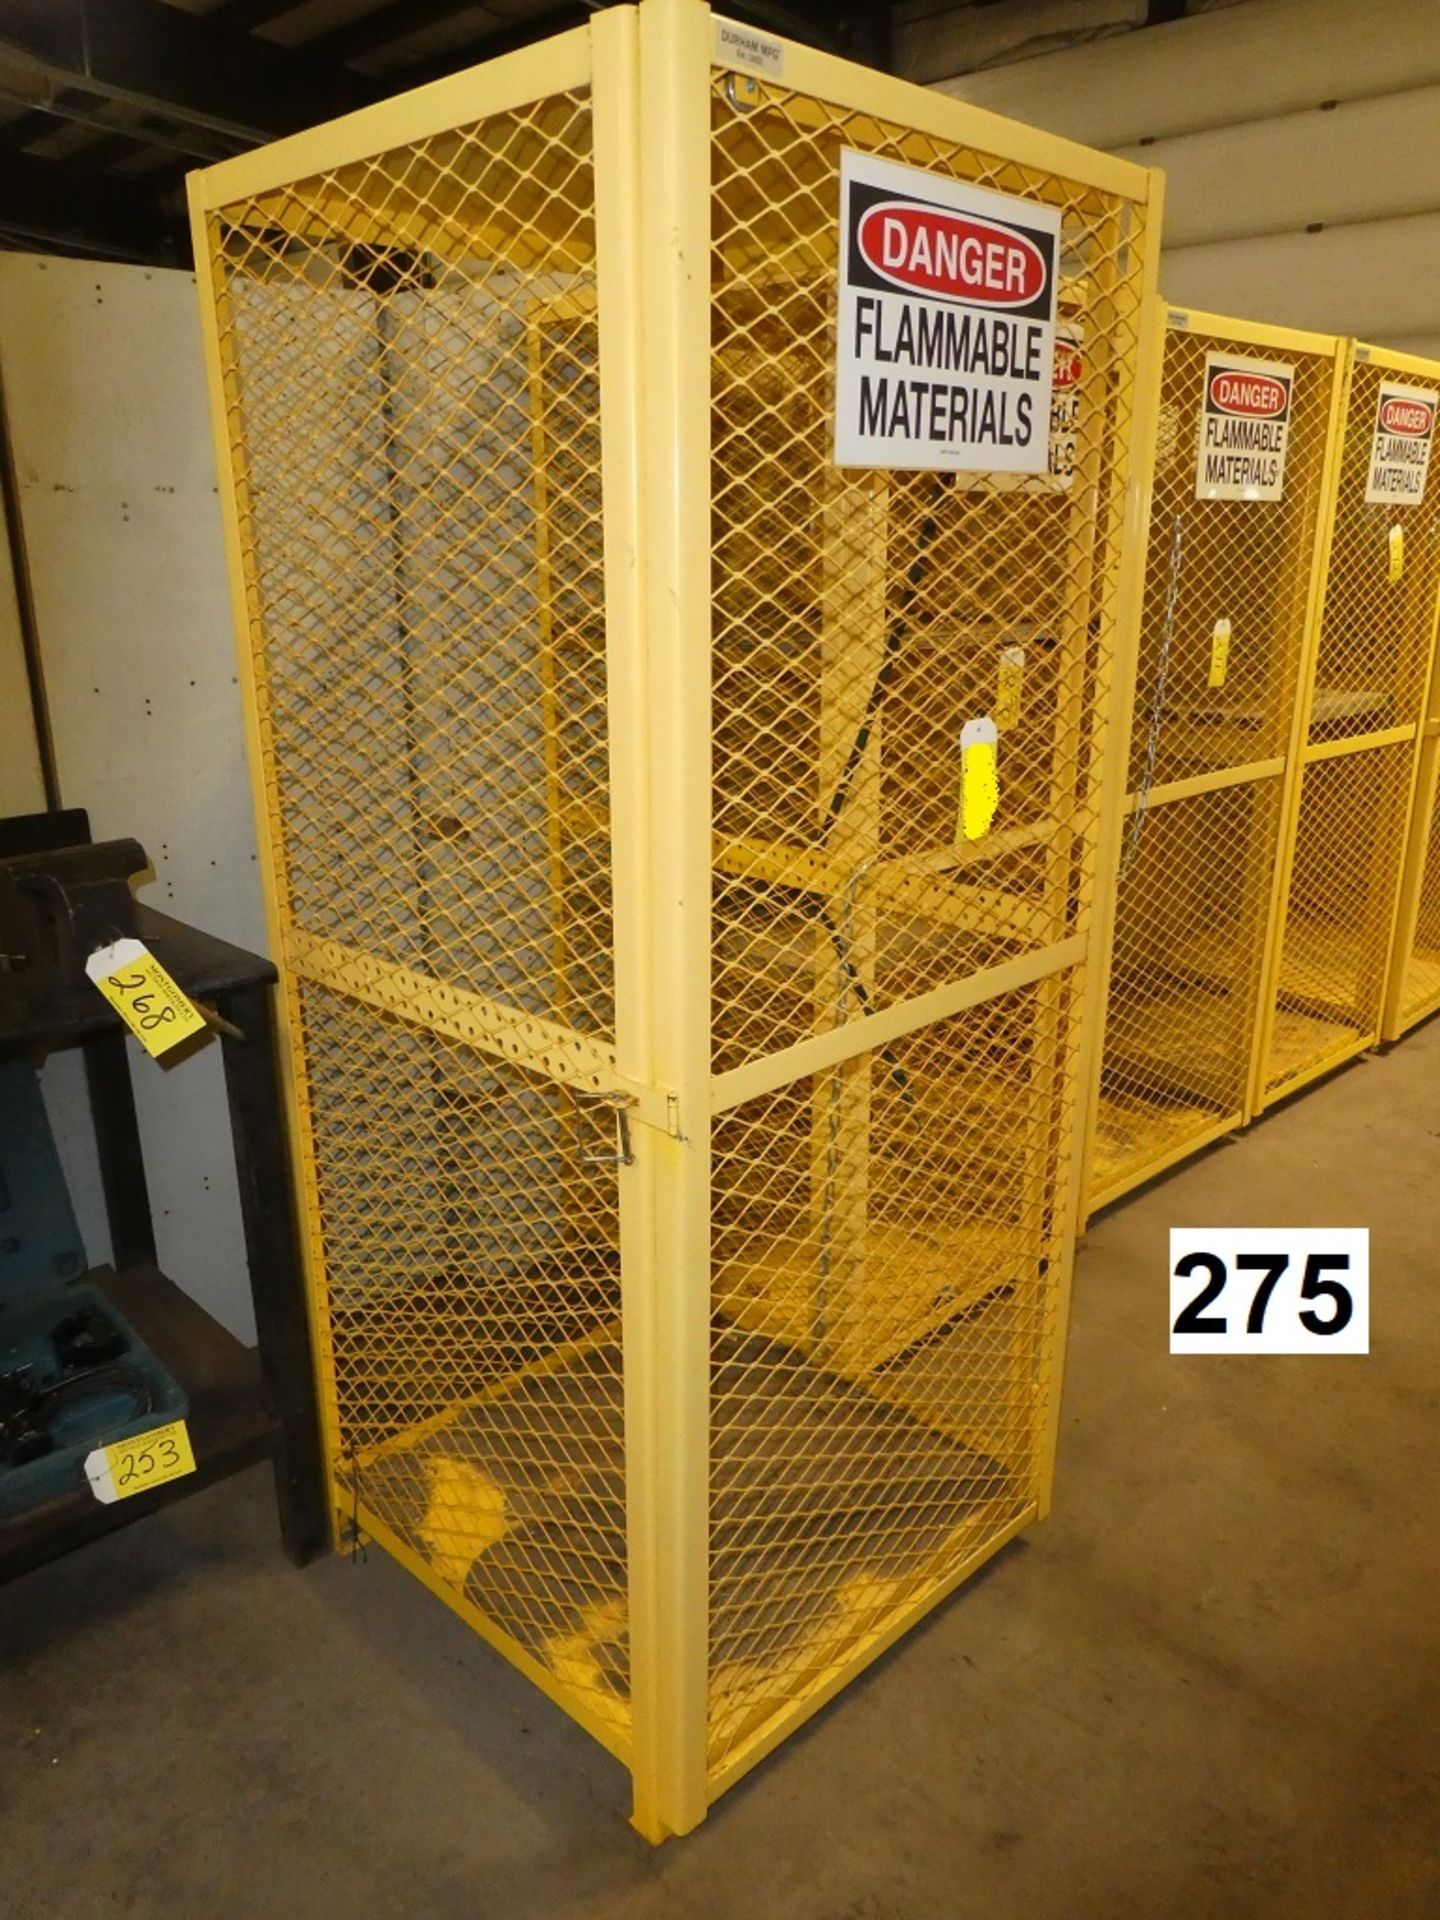 30"X30"X72" FLAMMABLE MATERIALS STORAGE CAGE